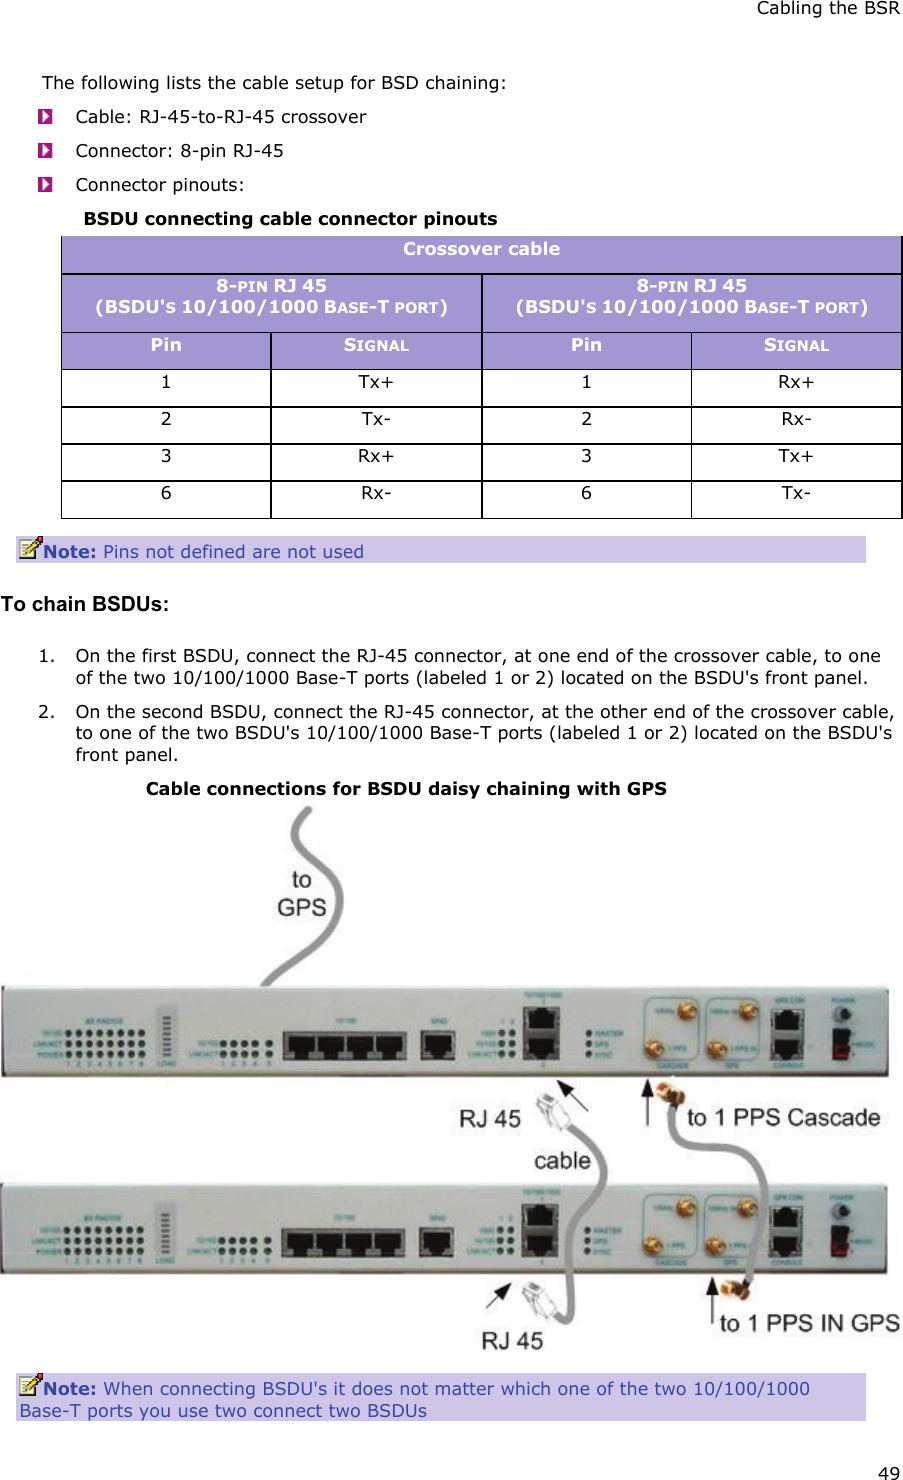 Cabling the BSR 49 The following lists the cable setup for BSD chaining:  Cable: RJ-45-to-RJ-45 crossover  Connector: 8-pin RJ-45  Connector pinouts: BSDU connecting cable connector pinouts Crossover cable 8-PIN RJ 45 (BSDU&apos;S 10/100/1000 BASE-T PORT) 8-PIN RJ 45 (BSDU&apos;S 10/100/1000 BASE-T PORT) Pin  SIGNAL Pin  SIGNAL 1 Tx+ 1 Rx+ 2 Tx- 2 Rx- 3 Rx+ 3 Tx+ 6 Rx- 6 Tx- Note: Pins not defined are not used To chain BSDUs: 1. On the first BSDU, connect the RJ-45 connector, at one end of the crossover cable, to one of the two 10/100/1000 Base-T ports (labeled 1 or 2) located on the BSDU&apos;s front panel. 2. On the second BSDU, connect the RJ-45 connector, at the other end of the crossover cable, to one of the two BSDU&apos;s 10/100/1000 Base-T ports (labeled 1 or 2) located on the BSDU&apos;s front panel. Cable connections for BSDU daisy chaining with GPS  Note: When connecting BSDU&apos;s it does not matter which one of the two 10/100/1000 Base-T ports you use two connect two BSDUs 